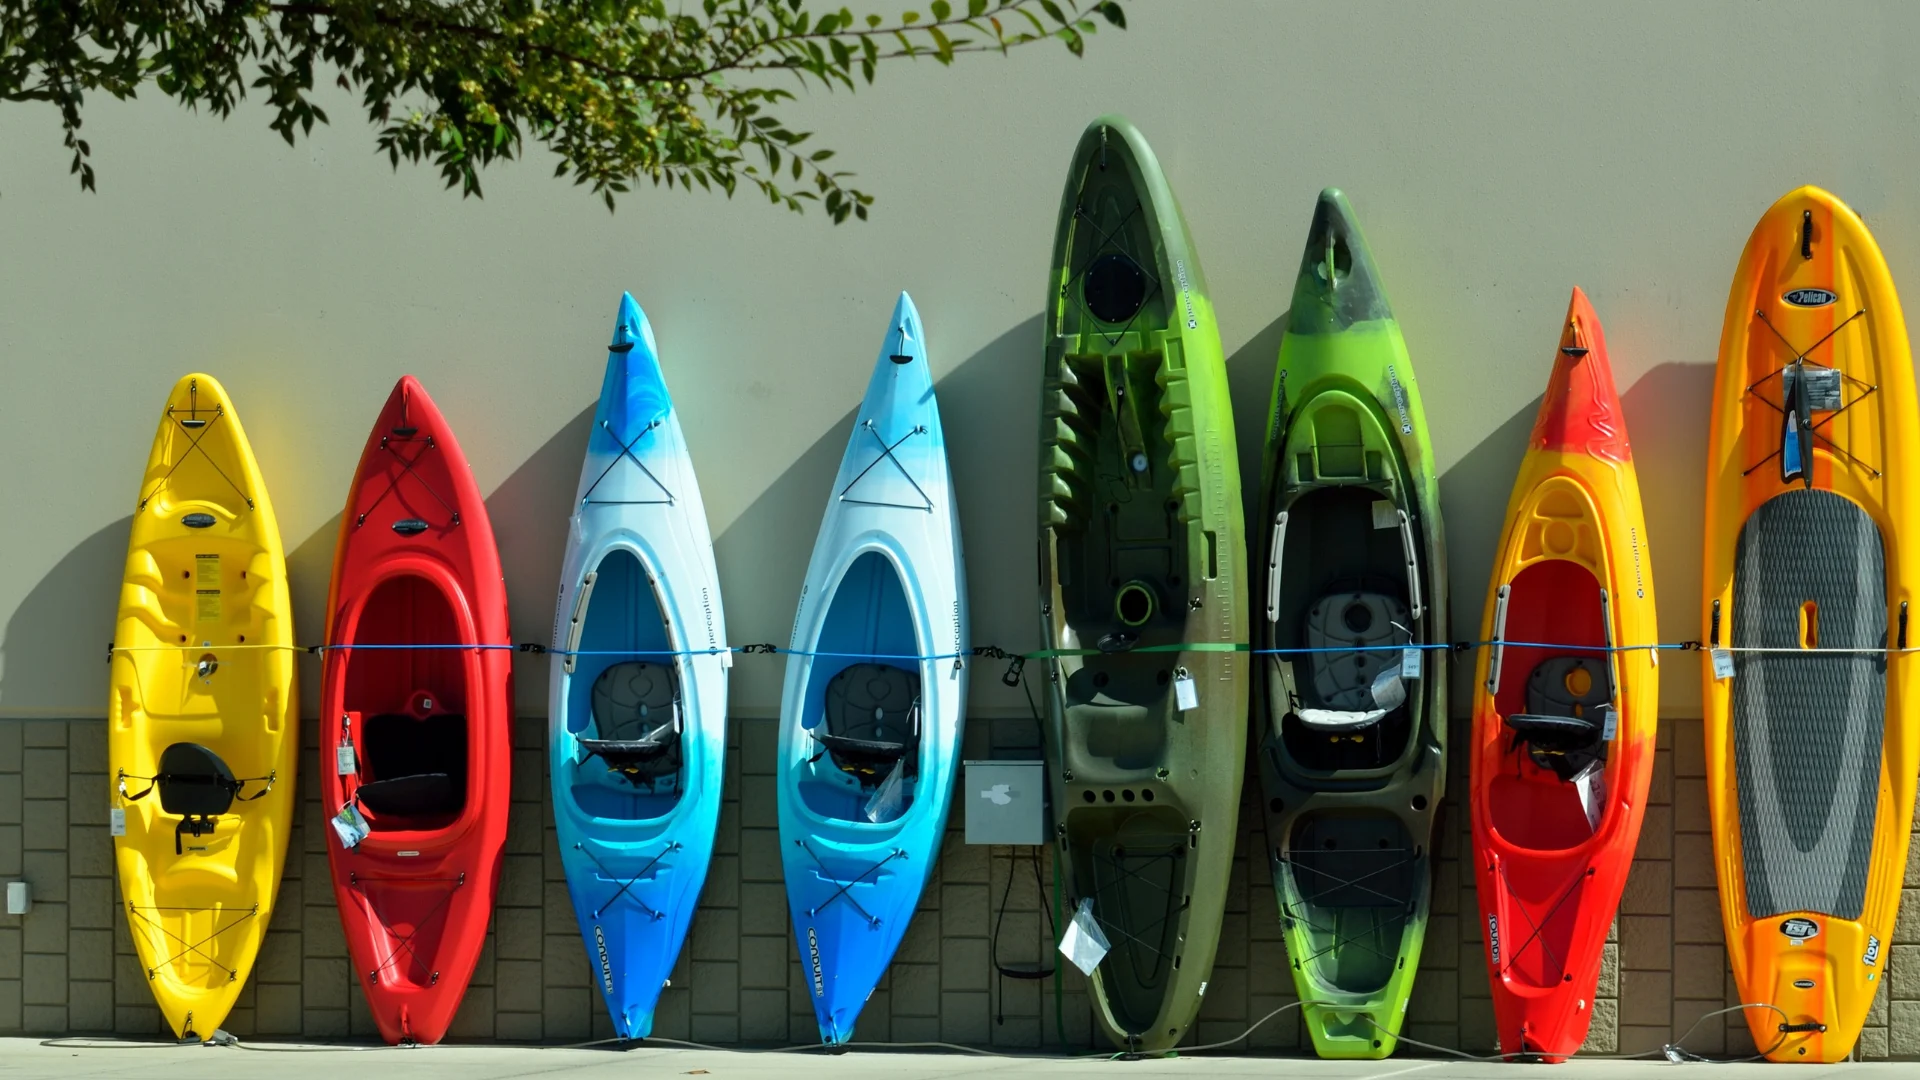 Different kayaks lined up